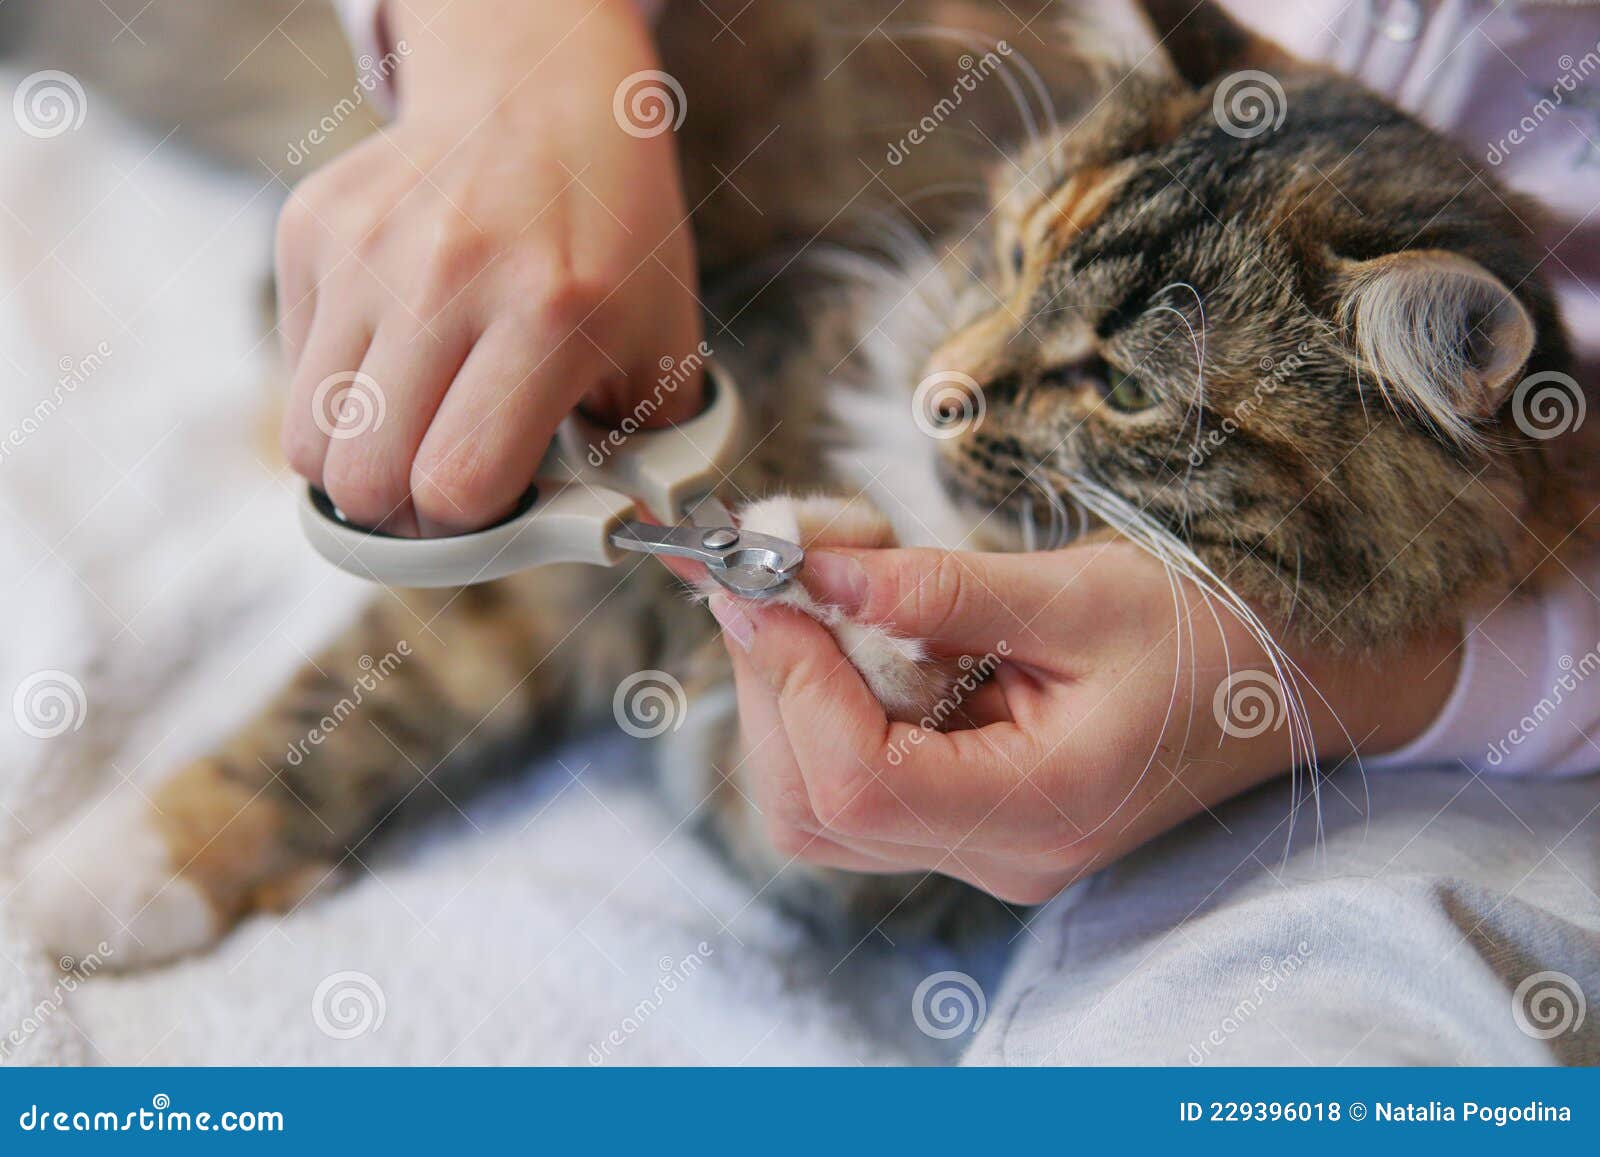 How To Trim a Cat's Nails | Chewtorials - YouTube